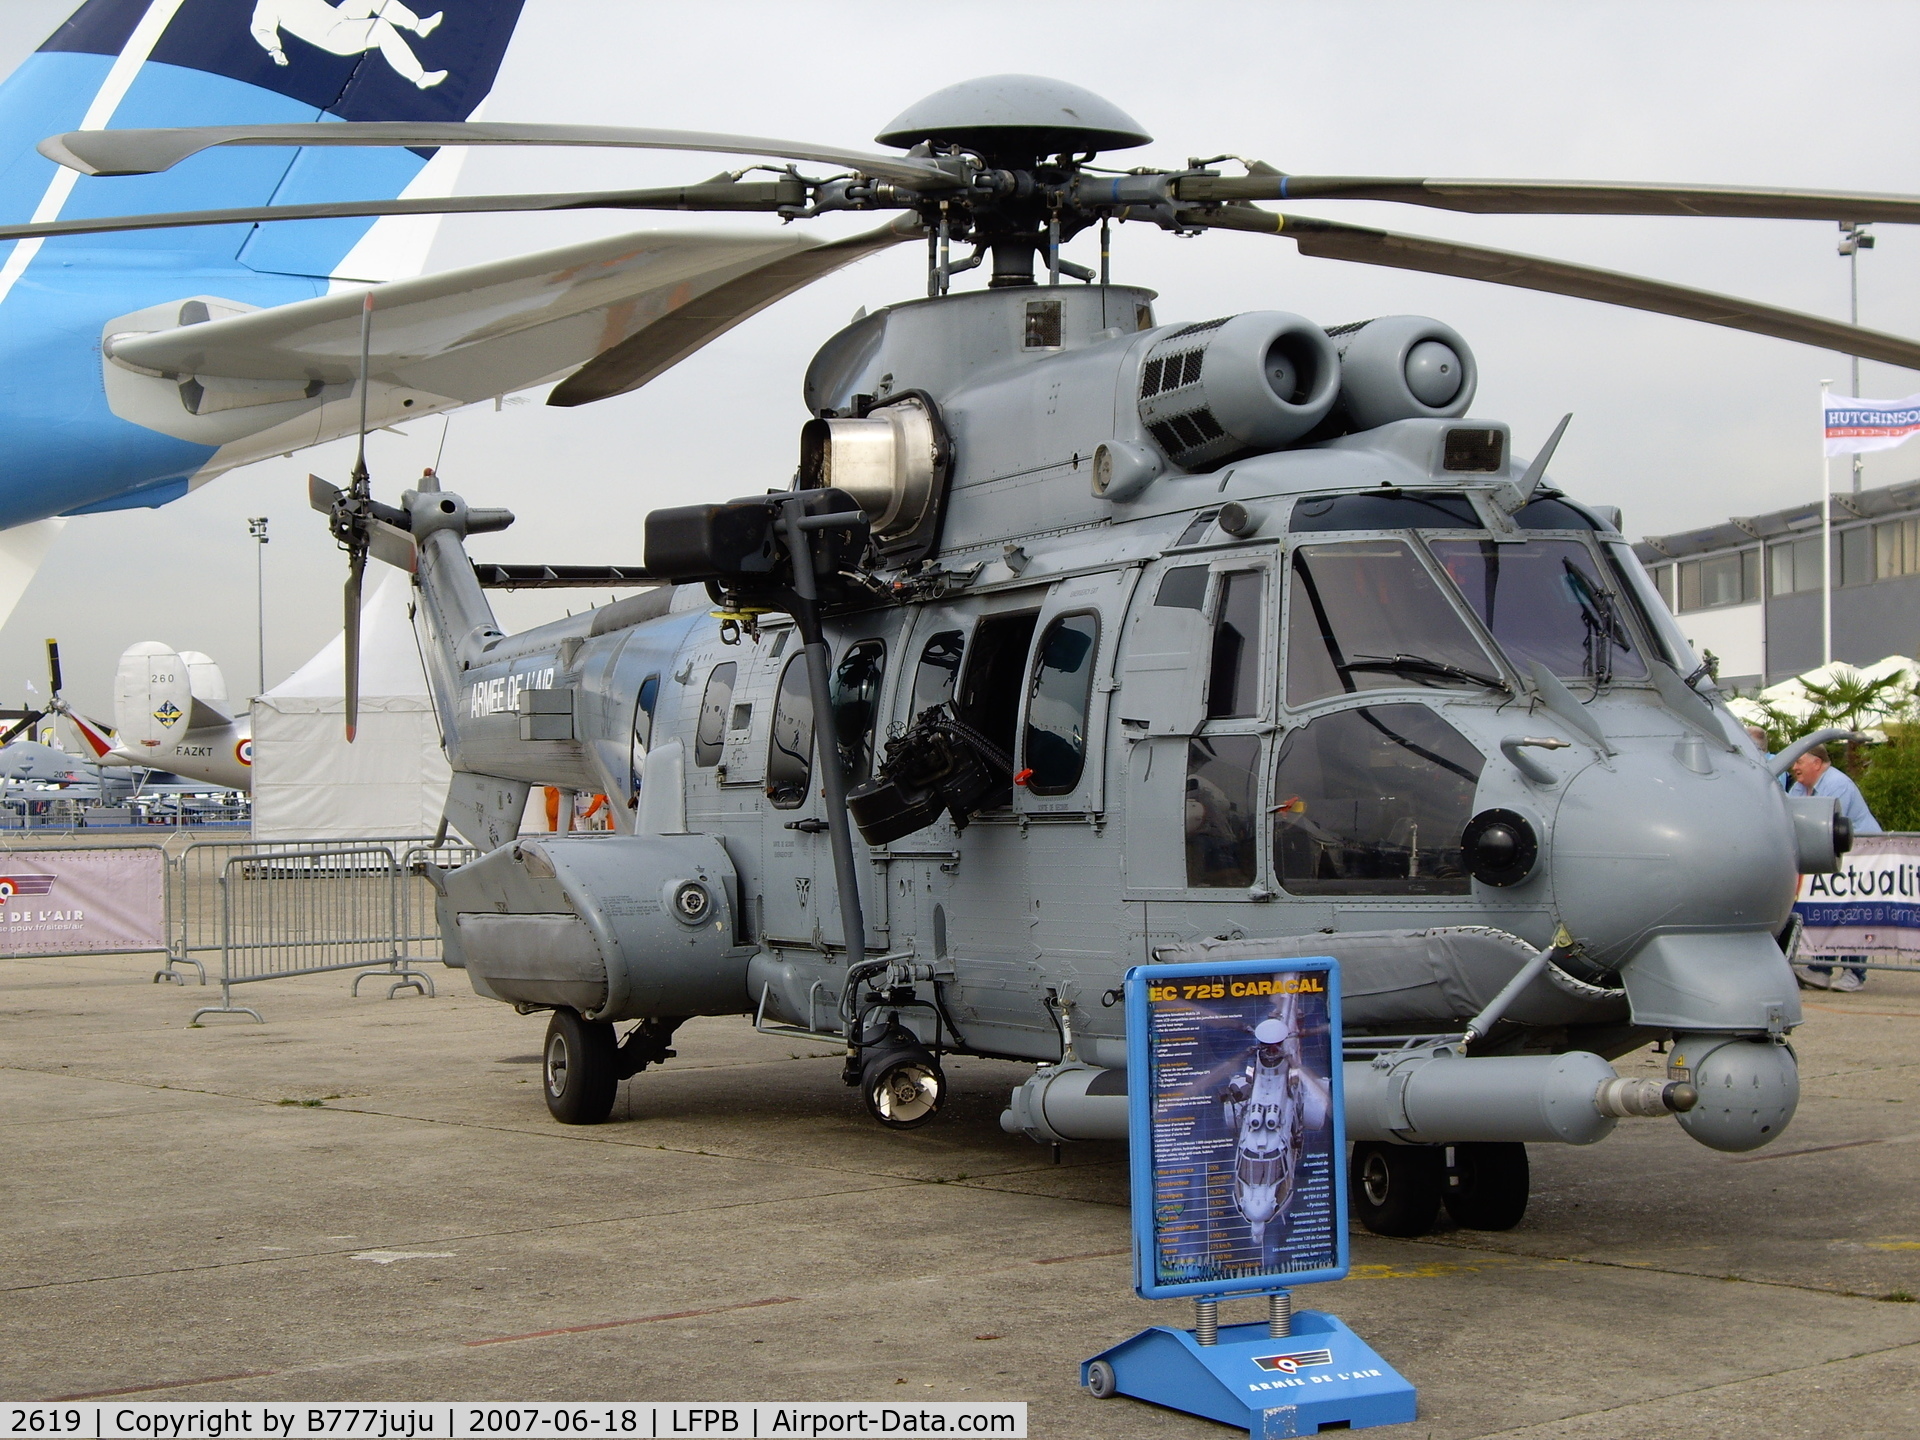 2619, Eurocopter EC-725R2 Caracal C/N 2619, on display at SIAE 2007